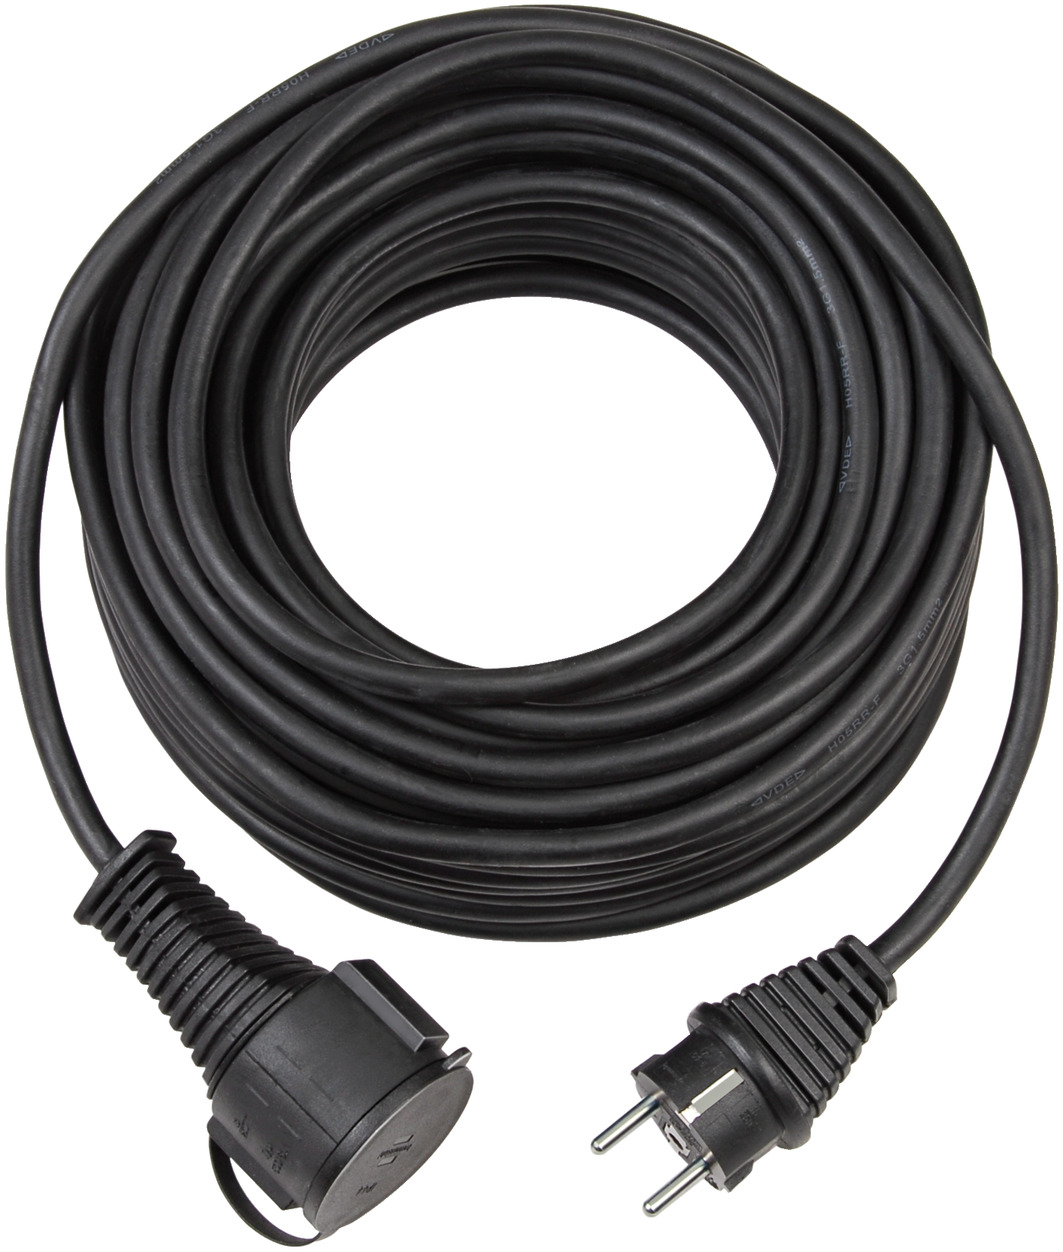 3G1,5 rubber black extension H05RR-F IP44 Quality | 5m cable brennenstuhl®